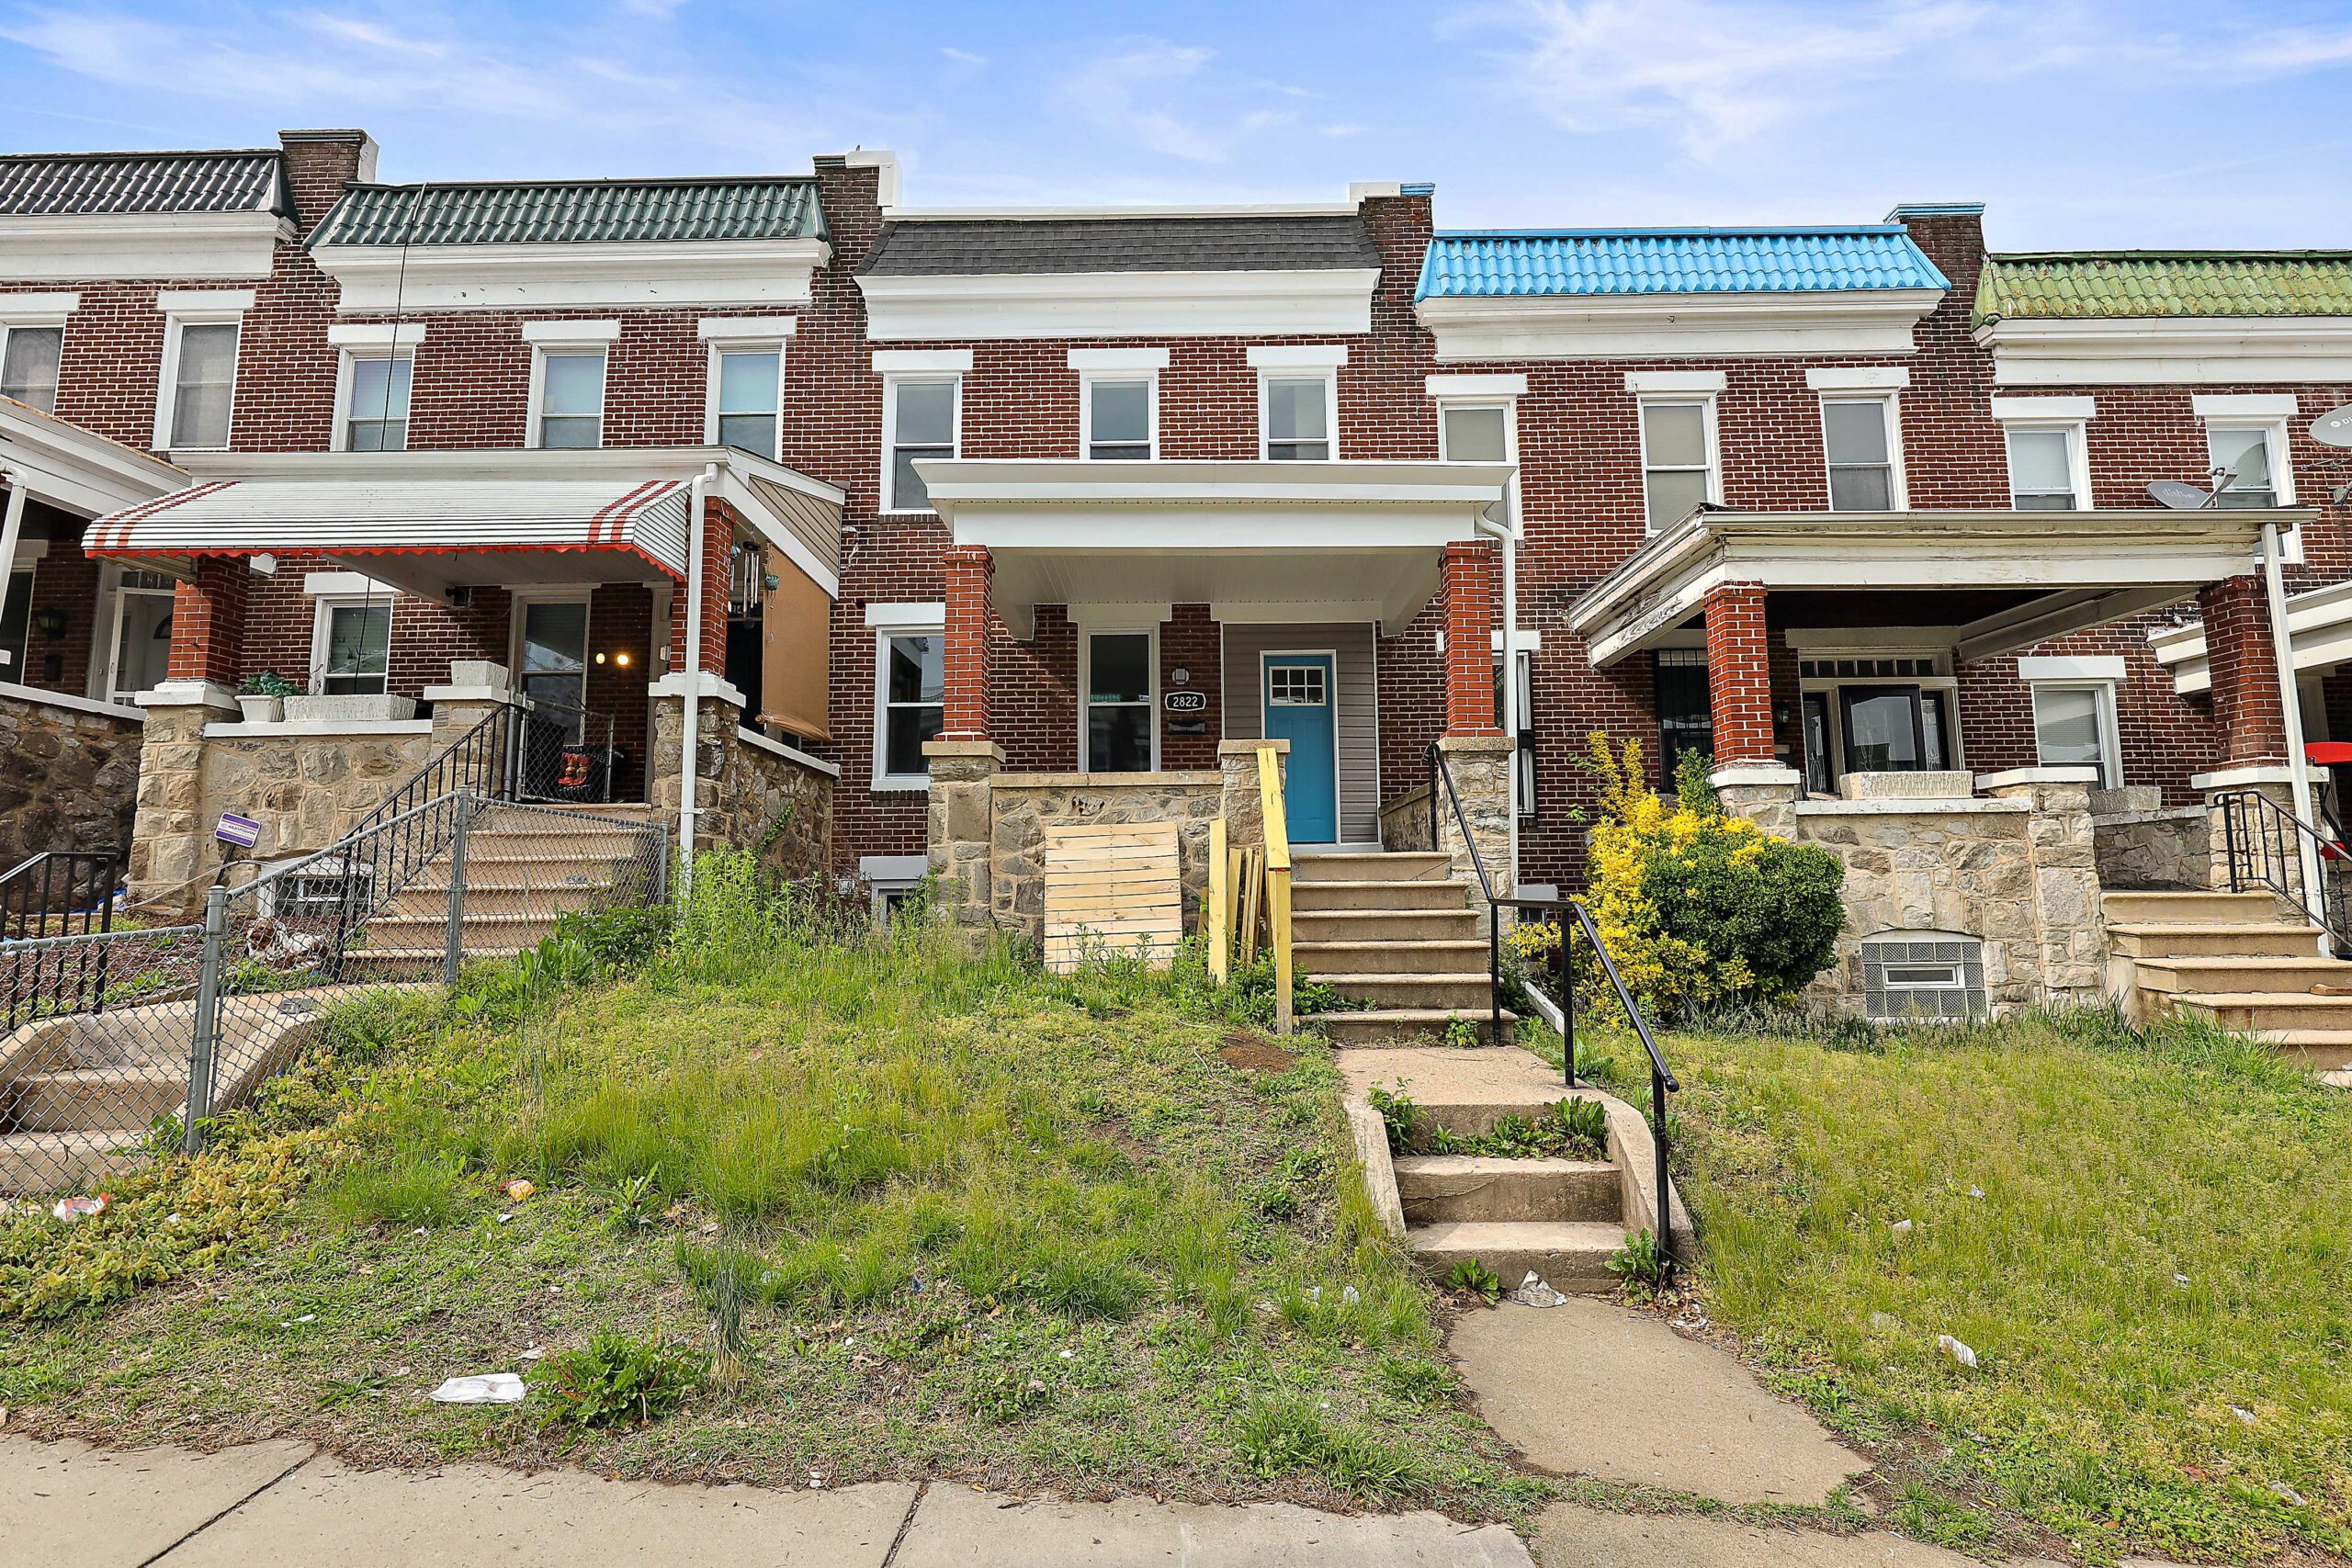 a row of brick townhouses with stairs leading up to the front door